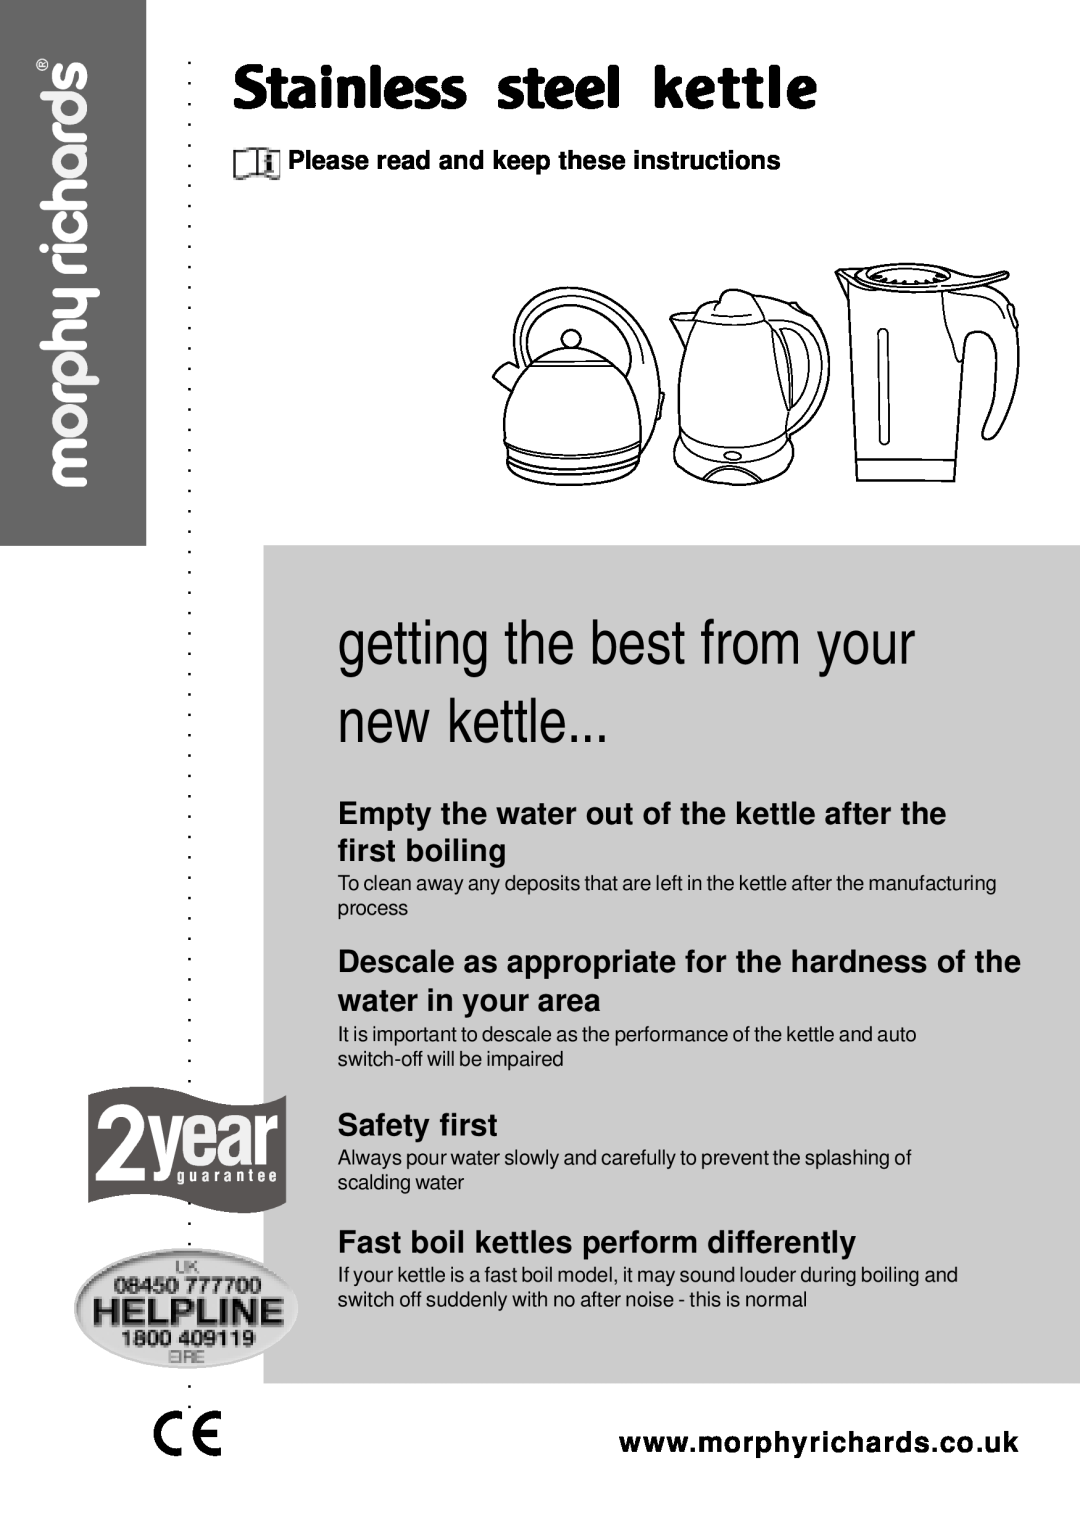 Morphy Richards Stainless steel kettle manual getting the best from your new kettle, Safety first 